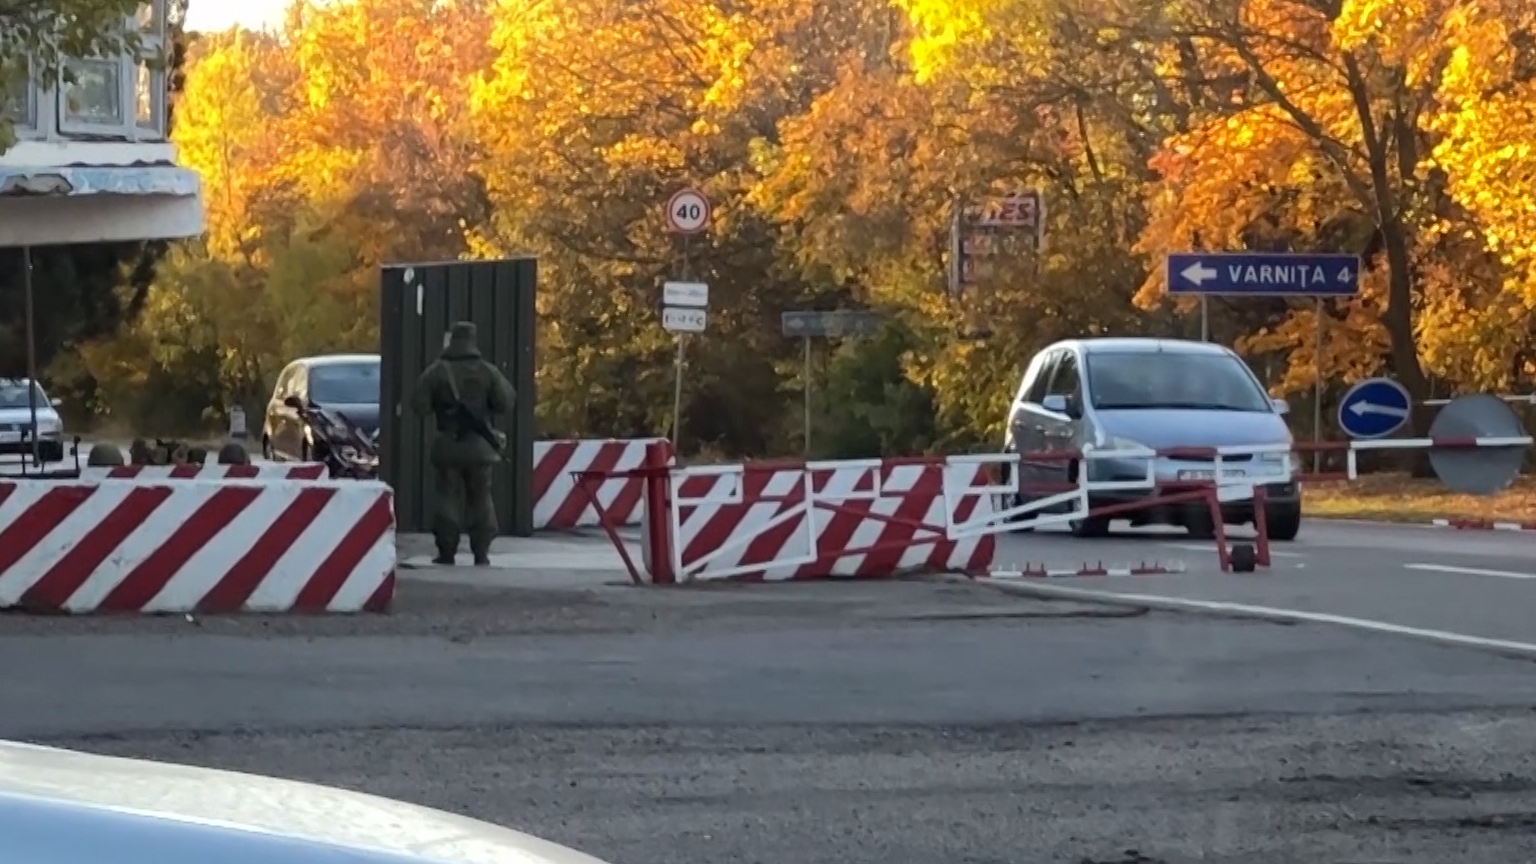 Russian soldiers guard Transnistria's Bender border crossing, about 50km from Moldova's capital Chisinau./CGTN/Johannes Pleschberger